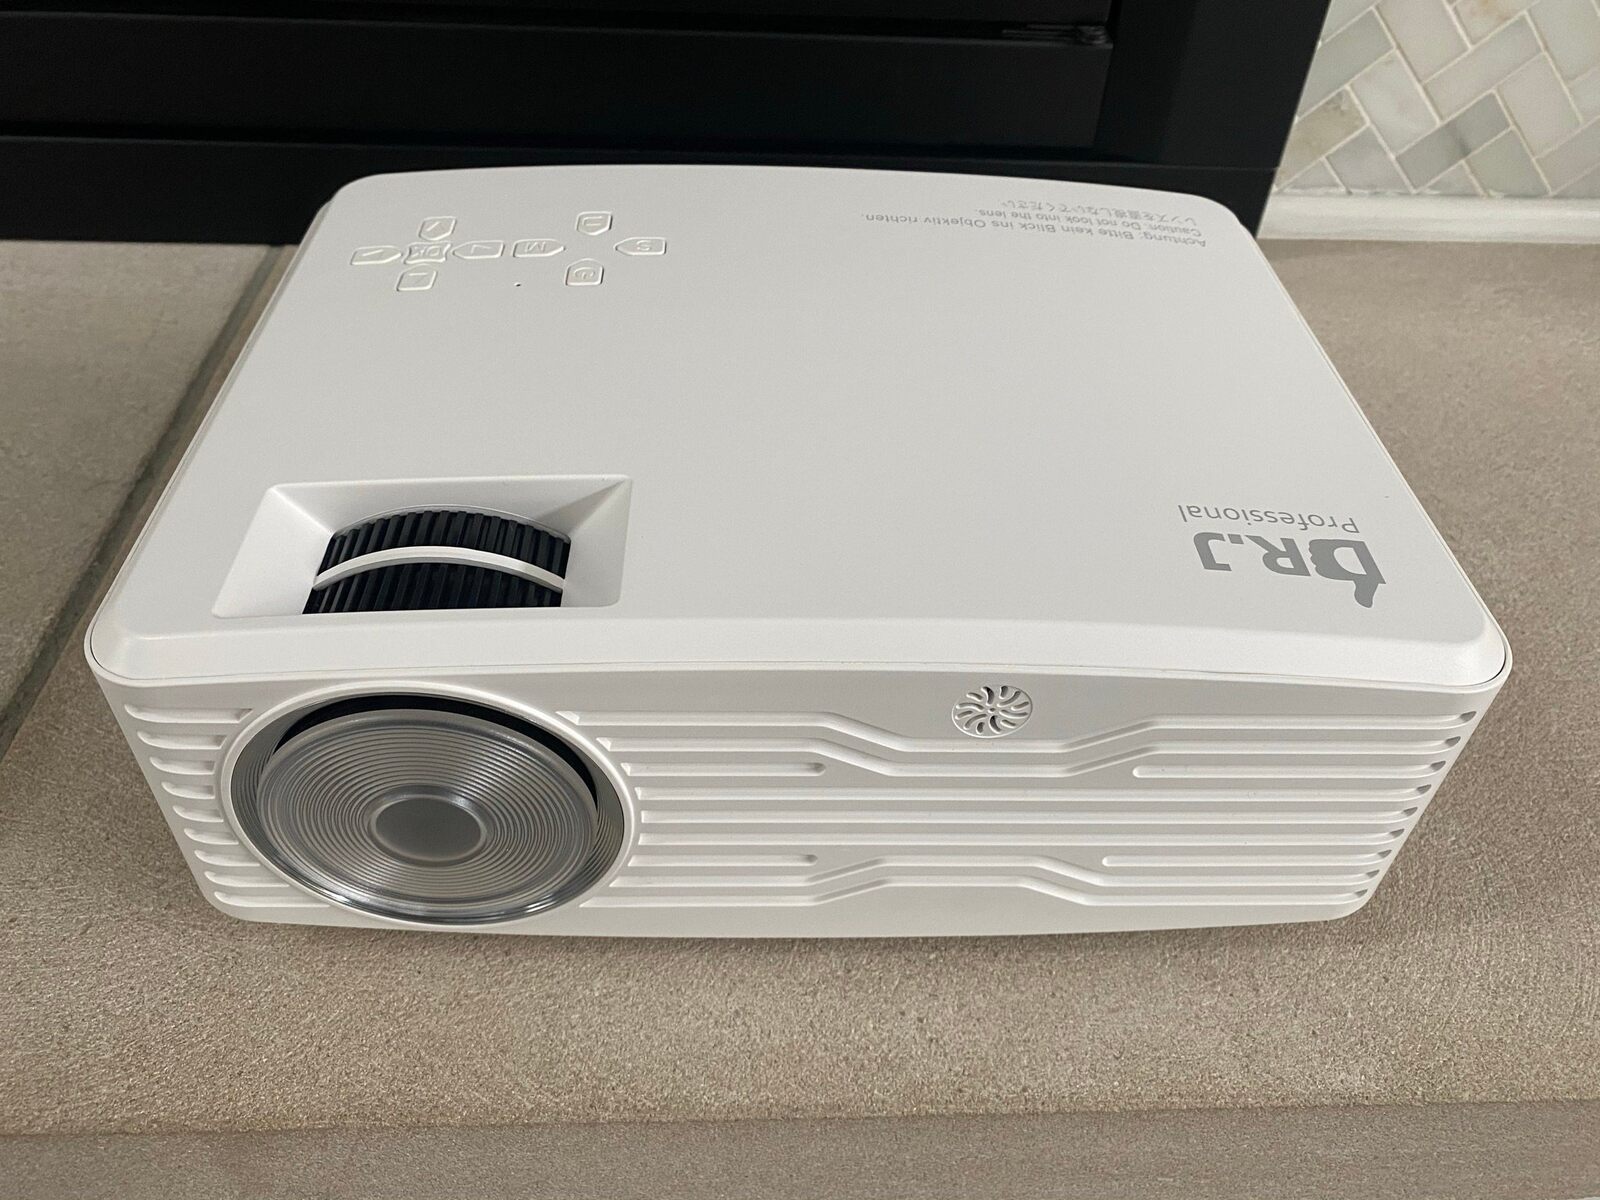 How To Connect Dr J Projector To IPhone